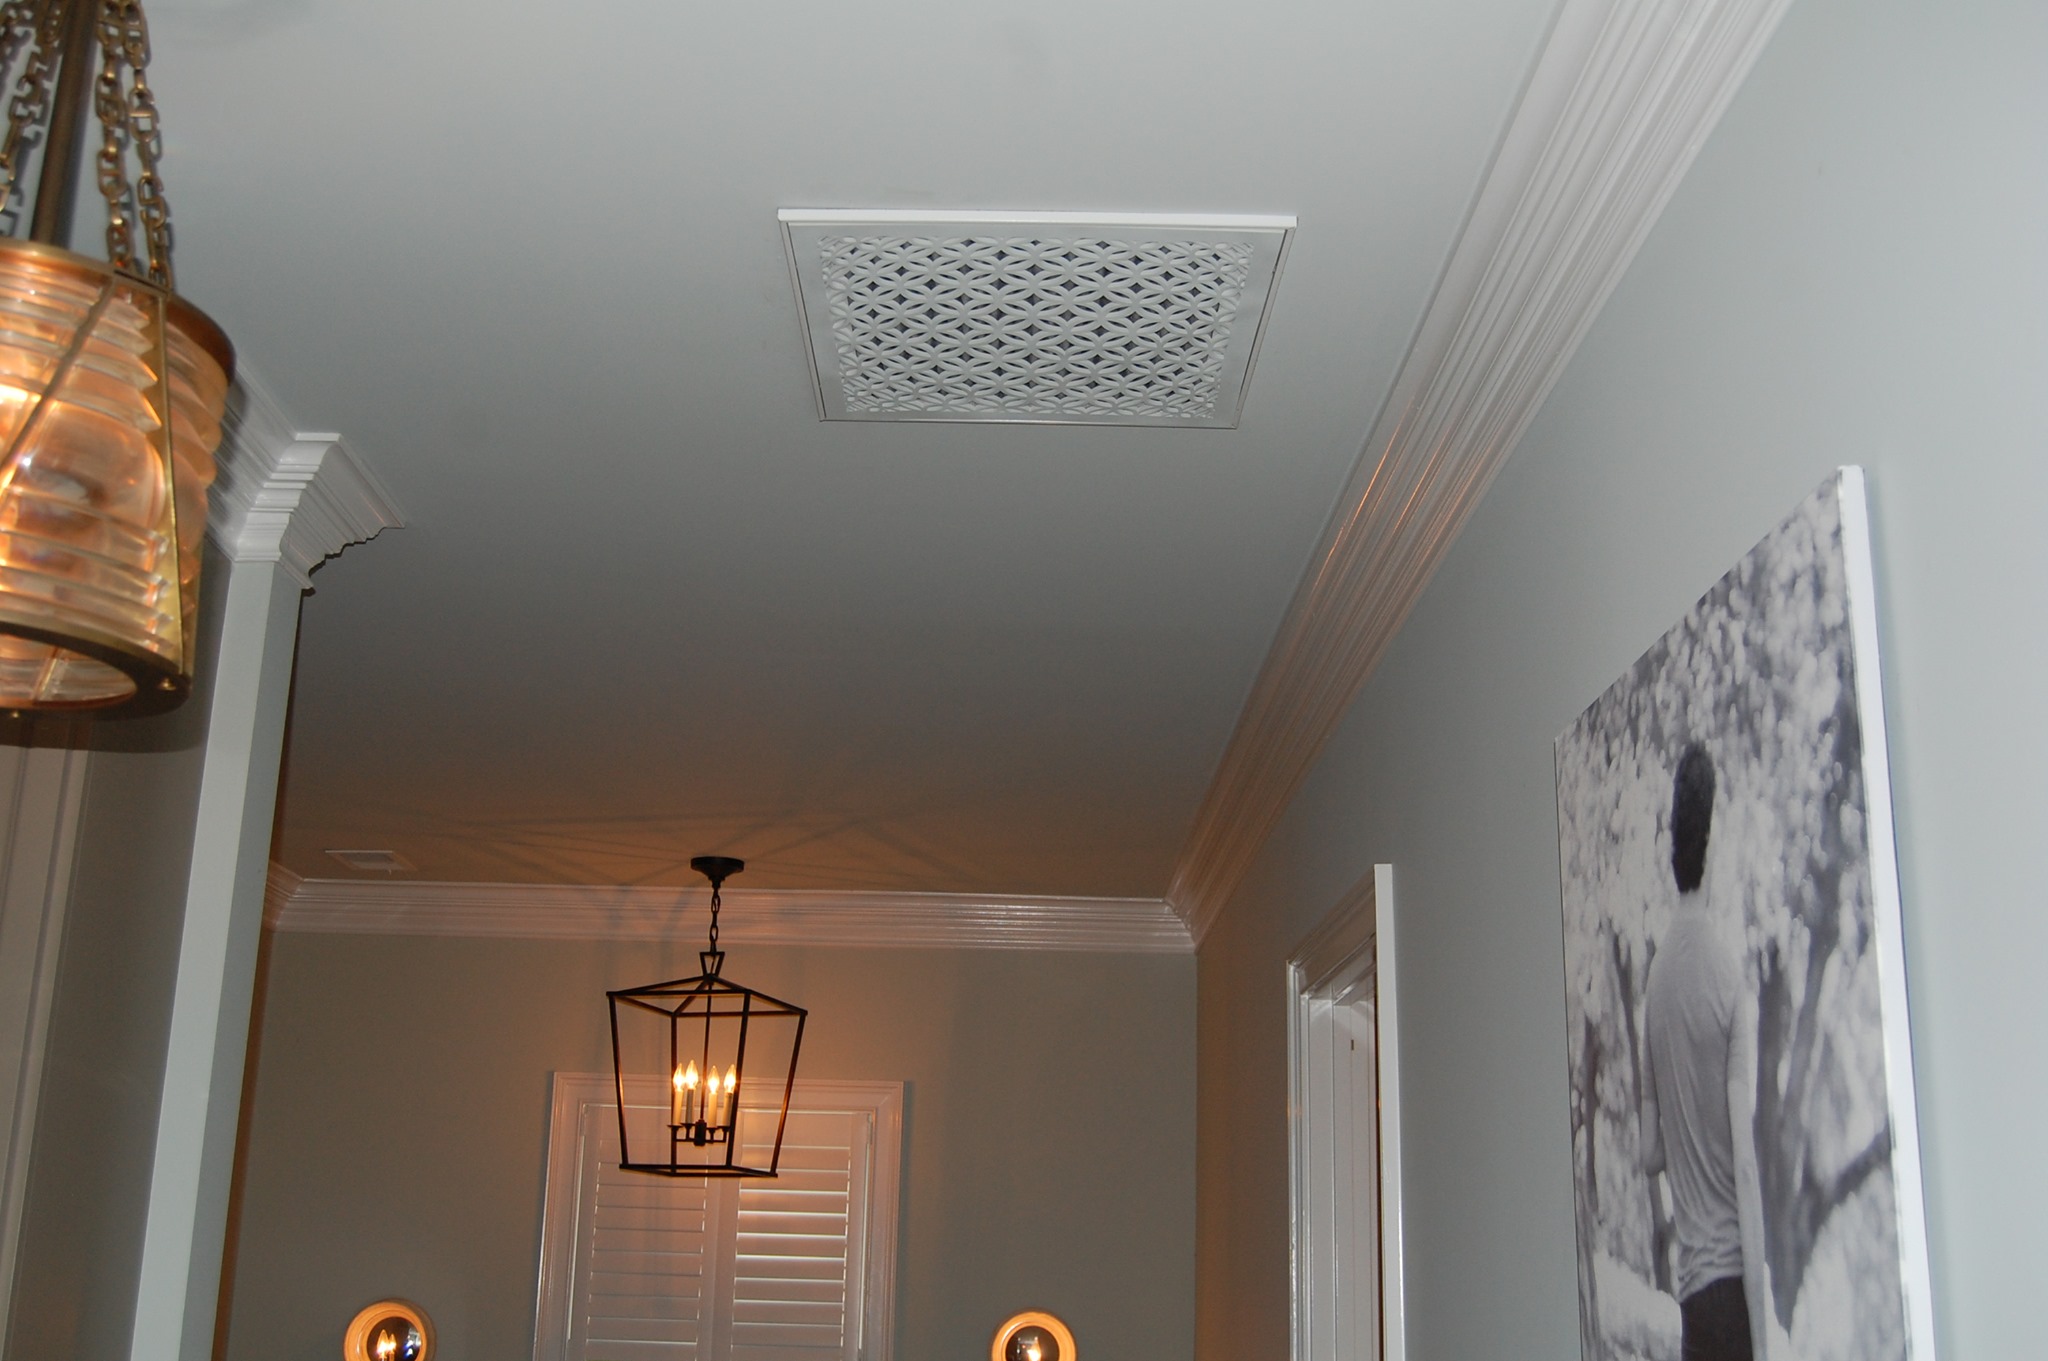 Spotlight on Stellar Air – Decorative Magnetic Vent Covers for